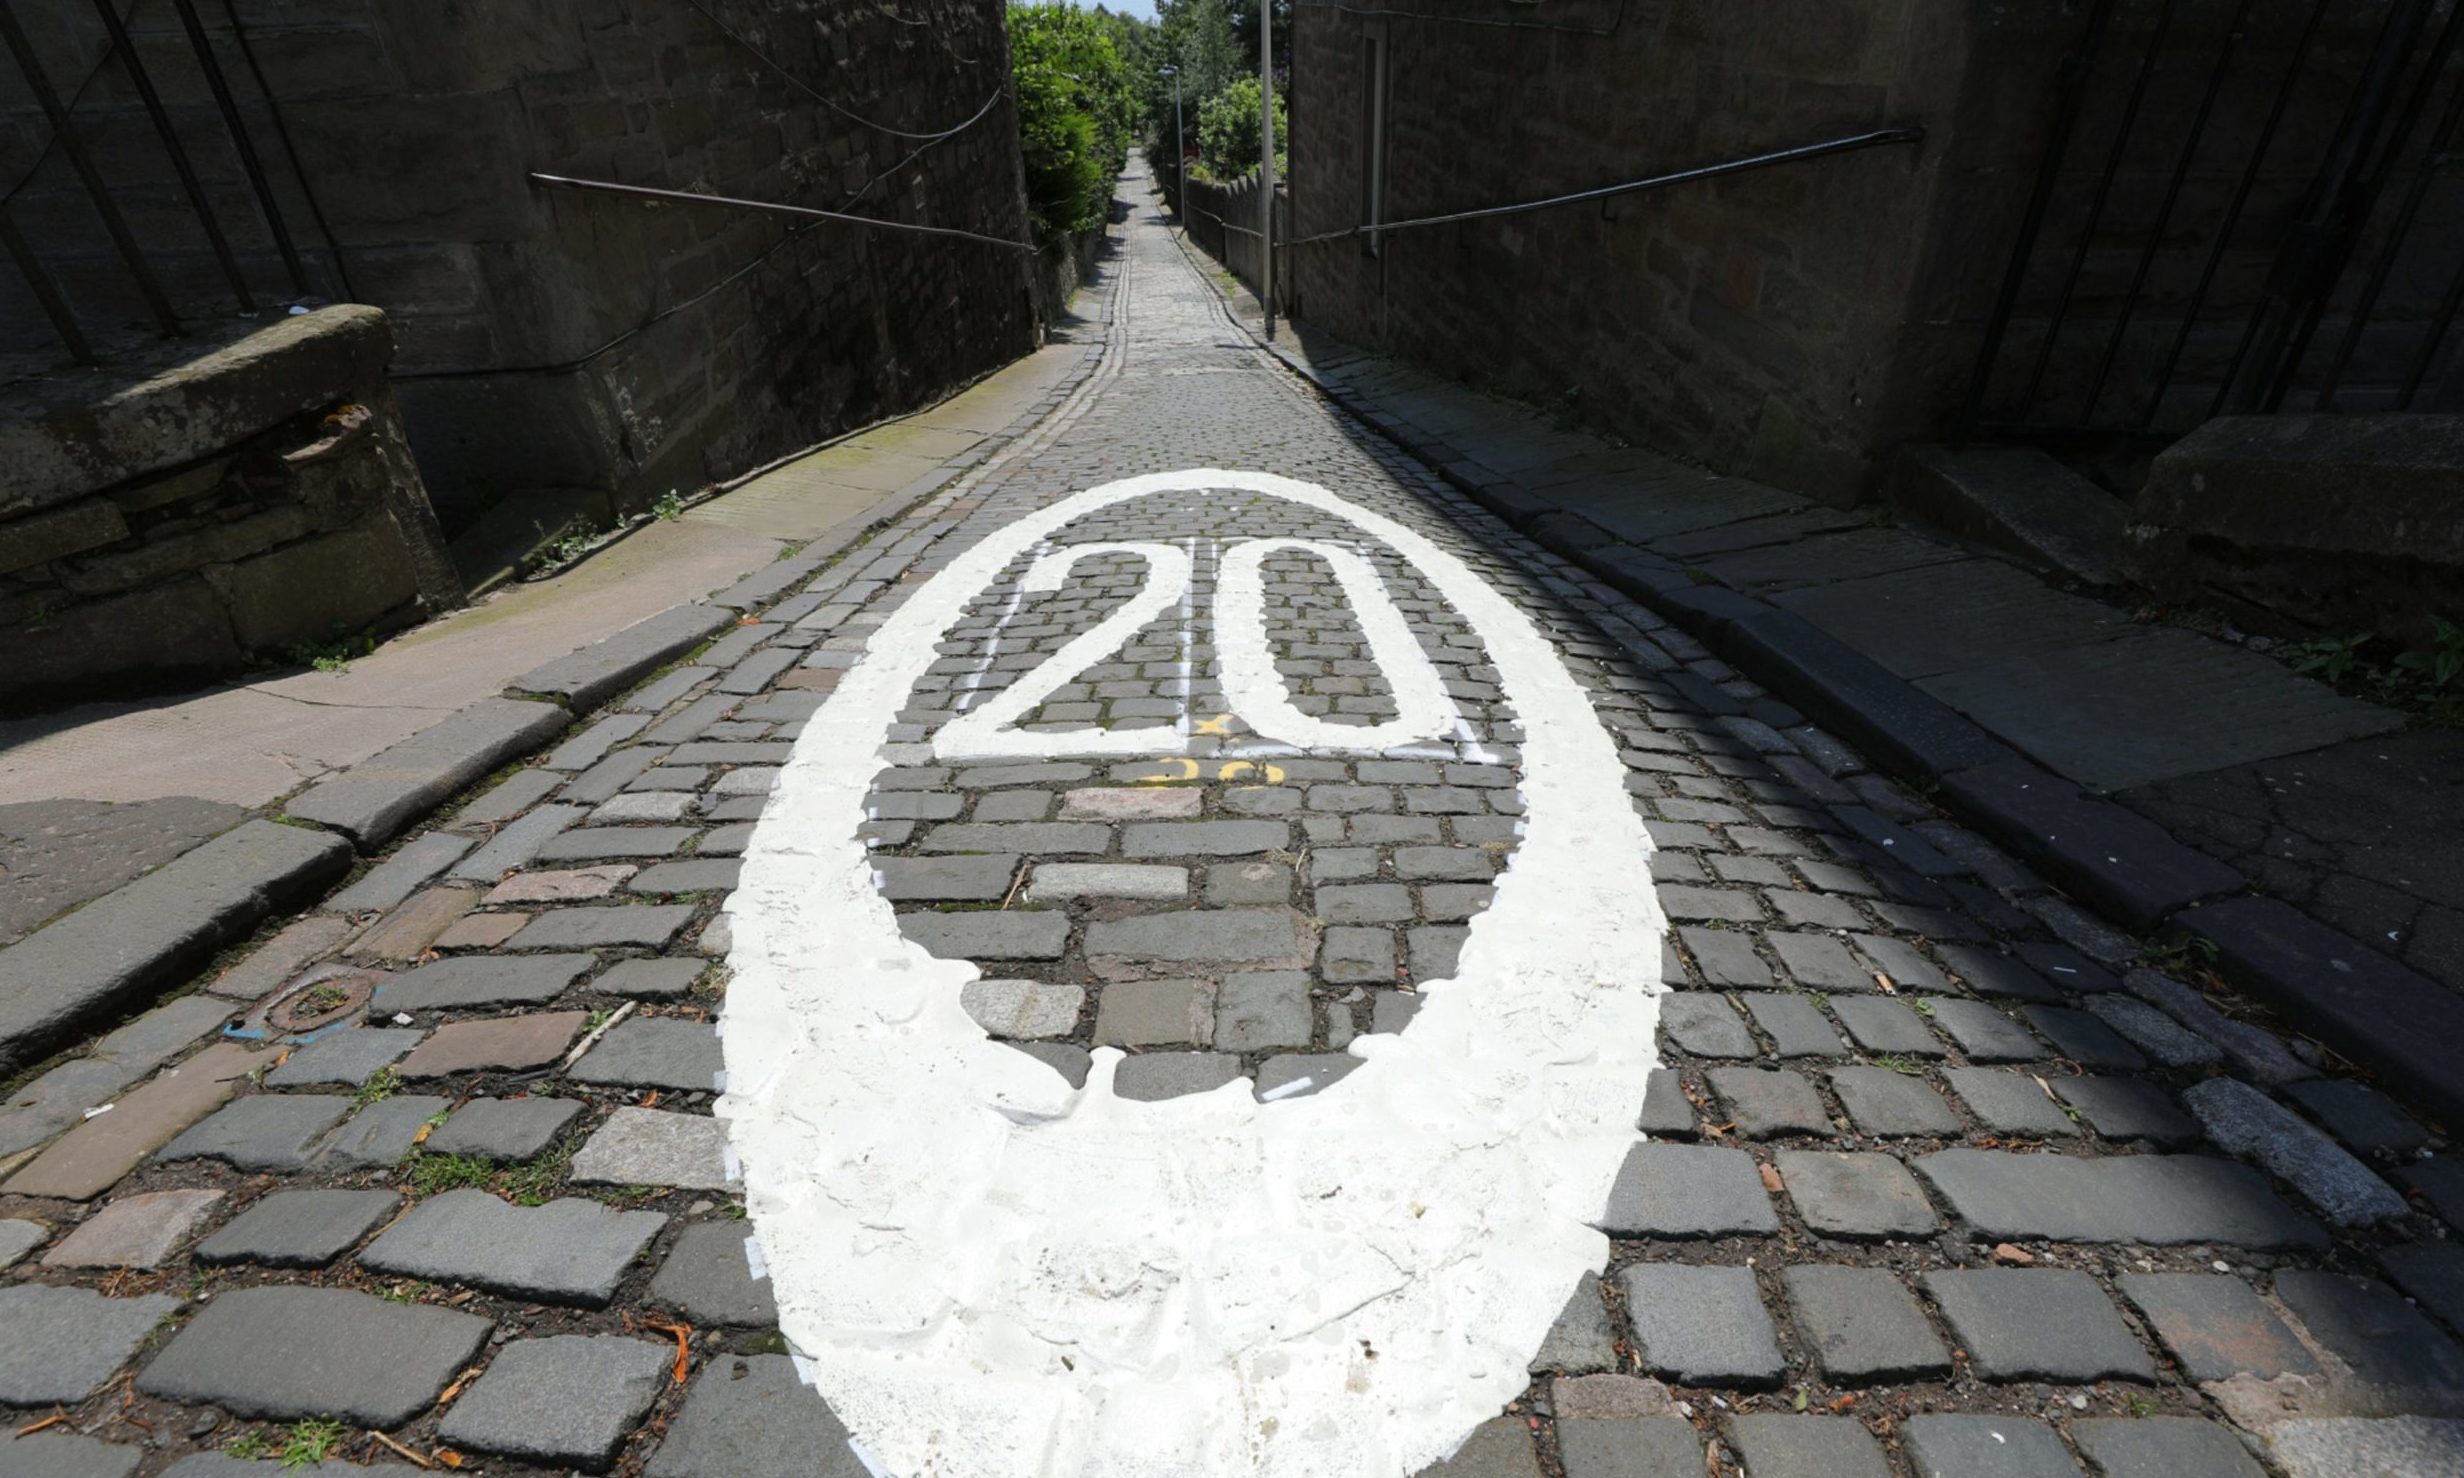 The 20mph road marking at the top of Strawberry Bank which caused outrage earlier this year.